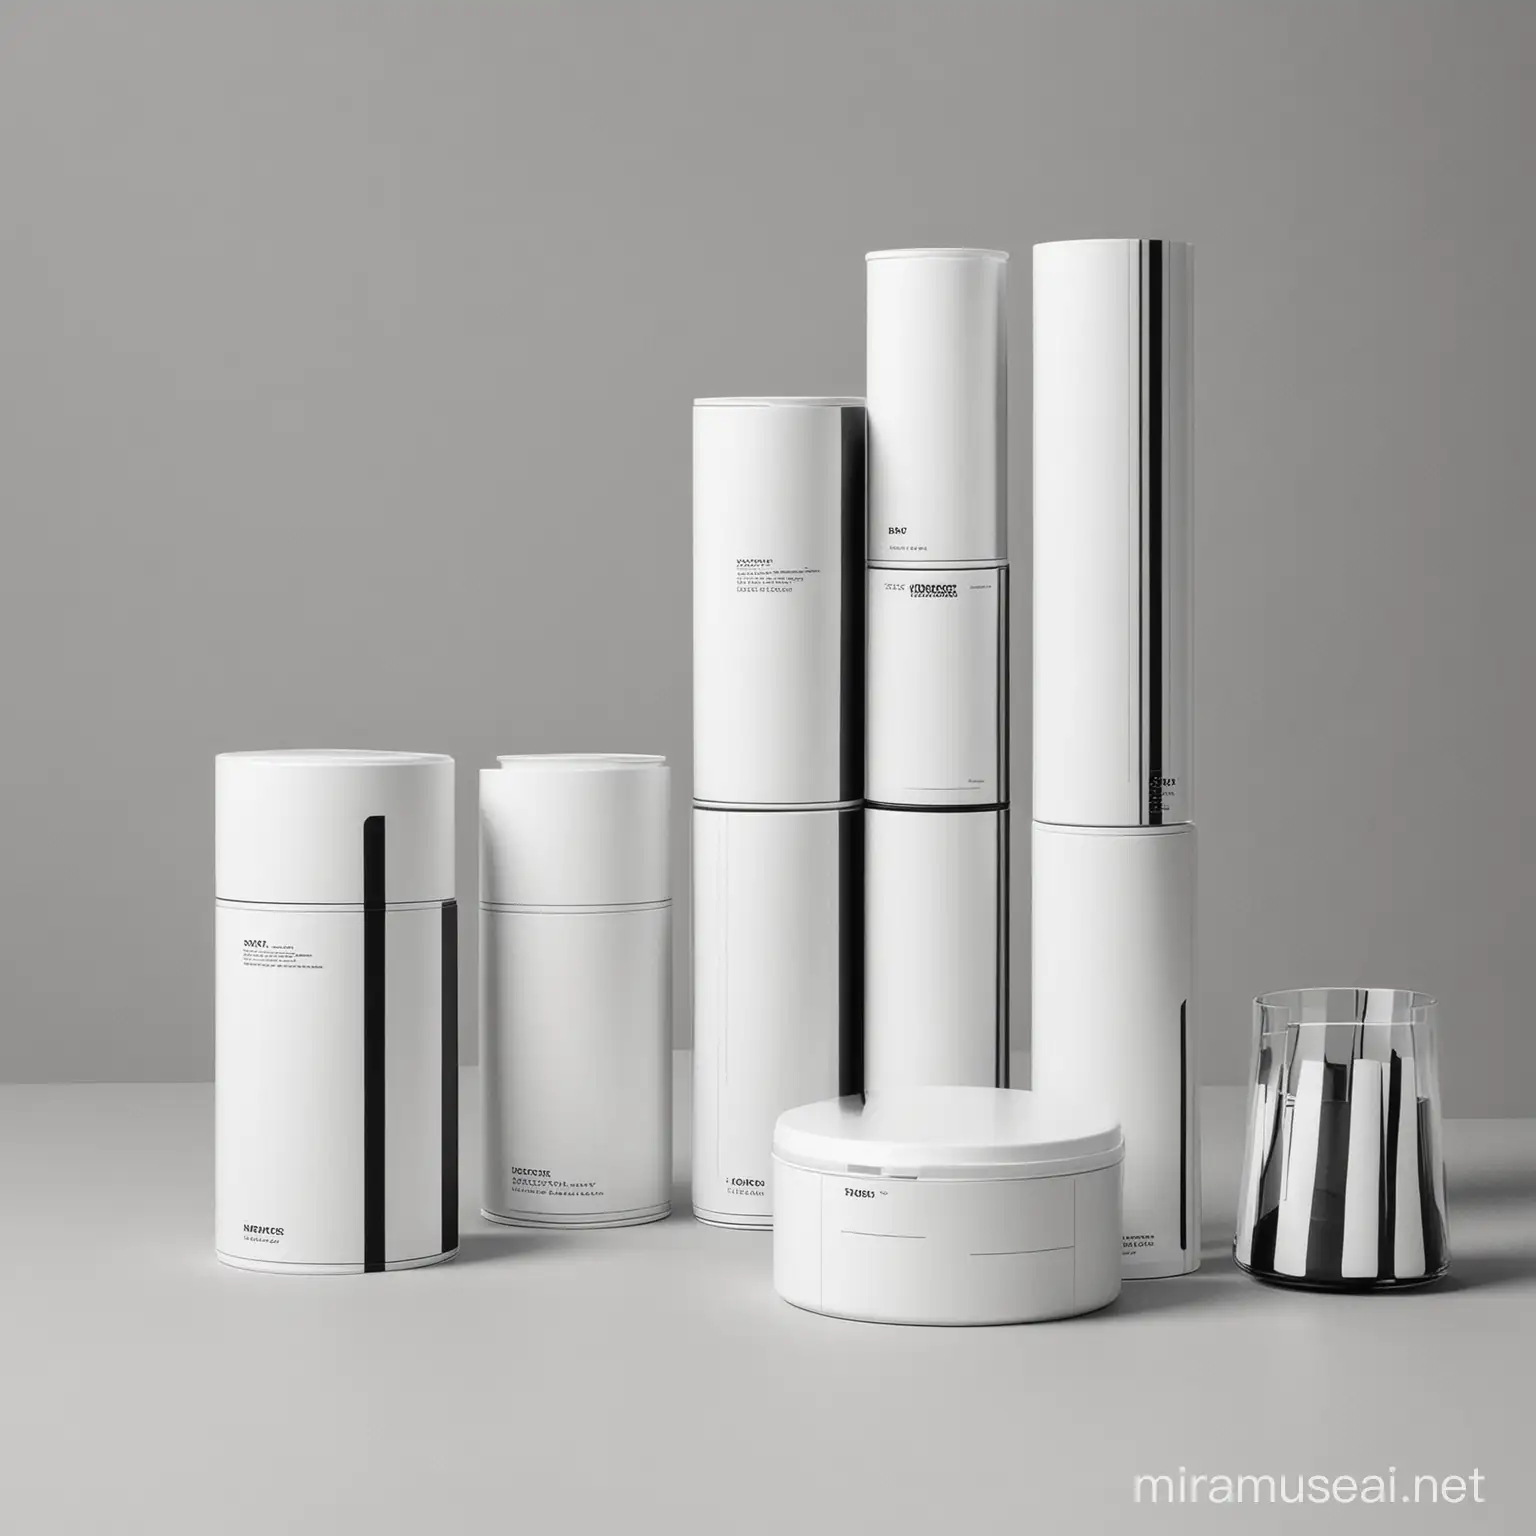 Minimalist Black and White Lines Storage Solutions